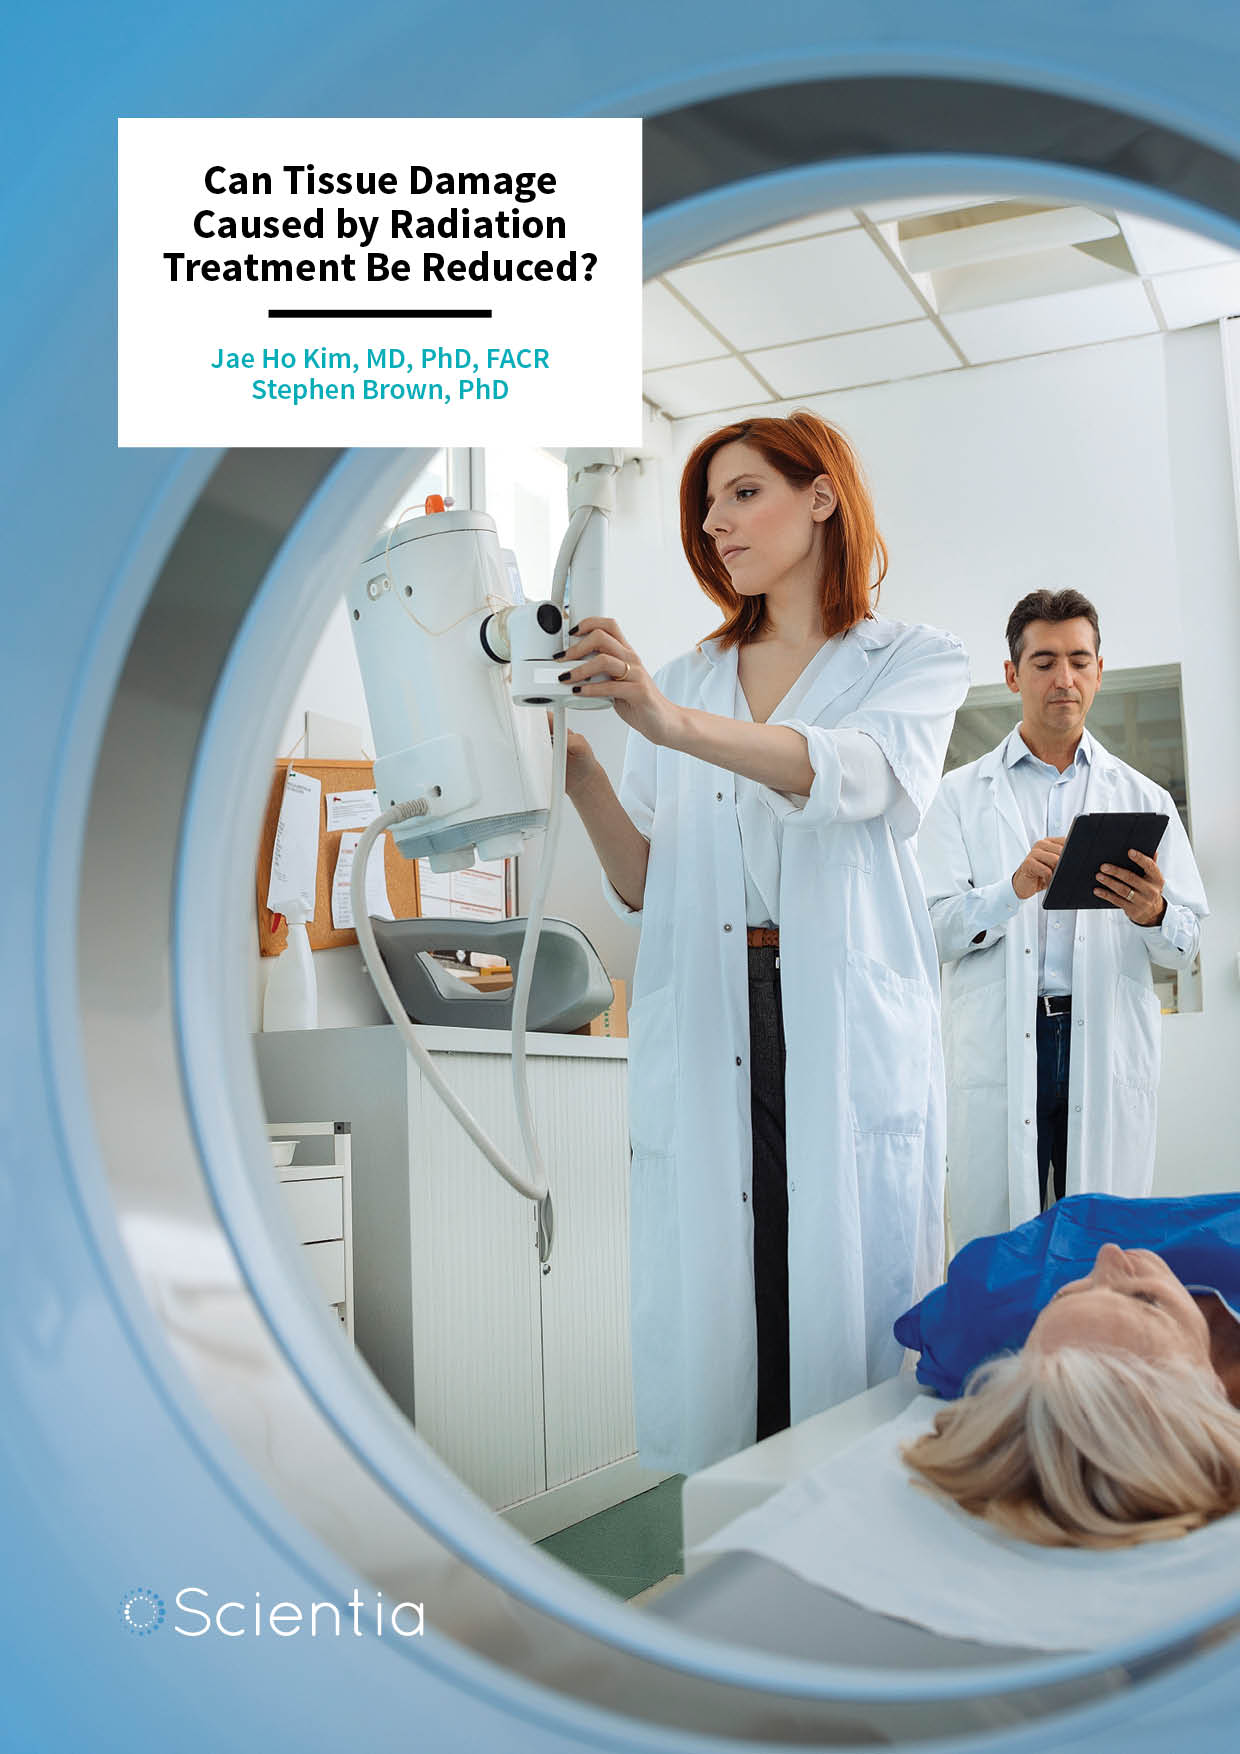 Dr Jae Ho Kim | Dr Stephen Brown – Can Tissue Damage Caused by Radiation Treatment Be Reduced?